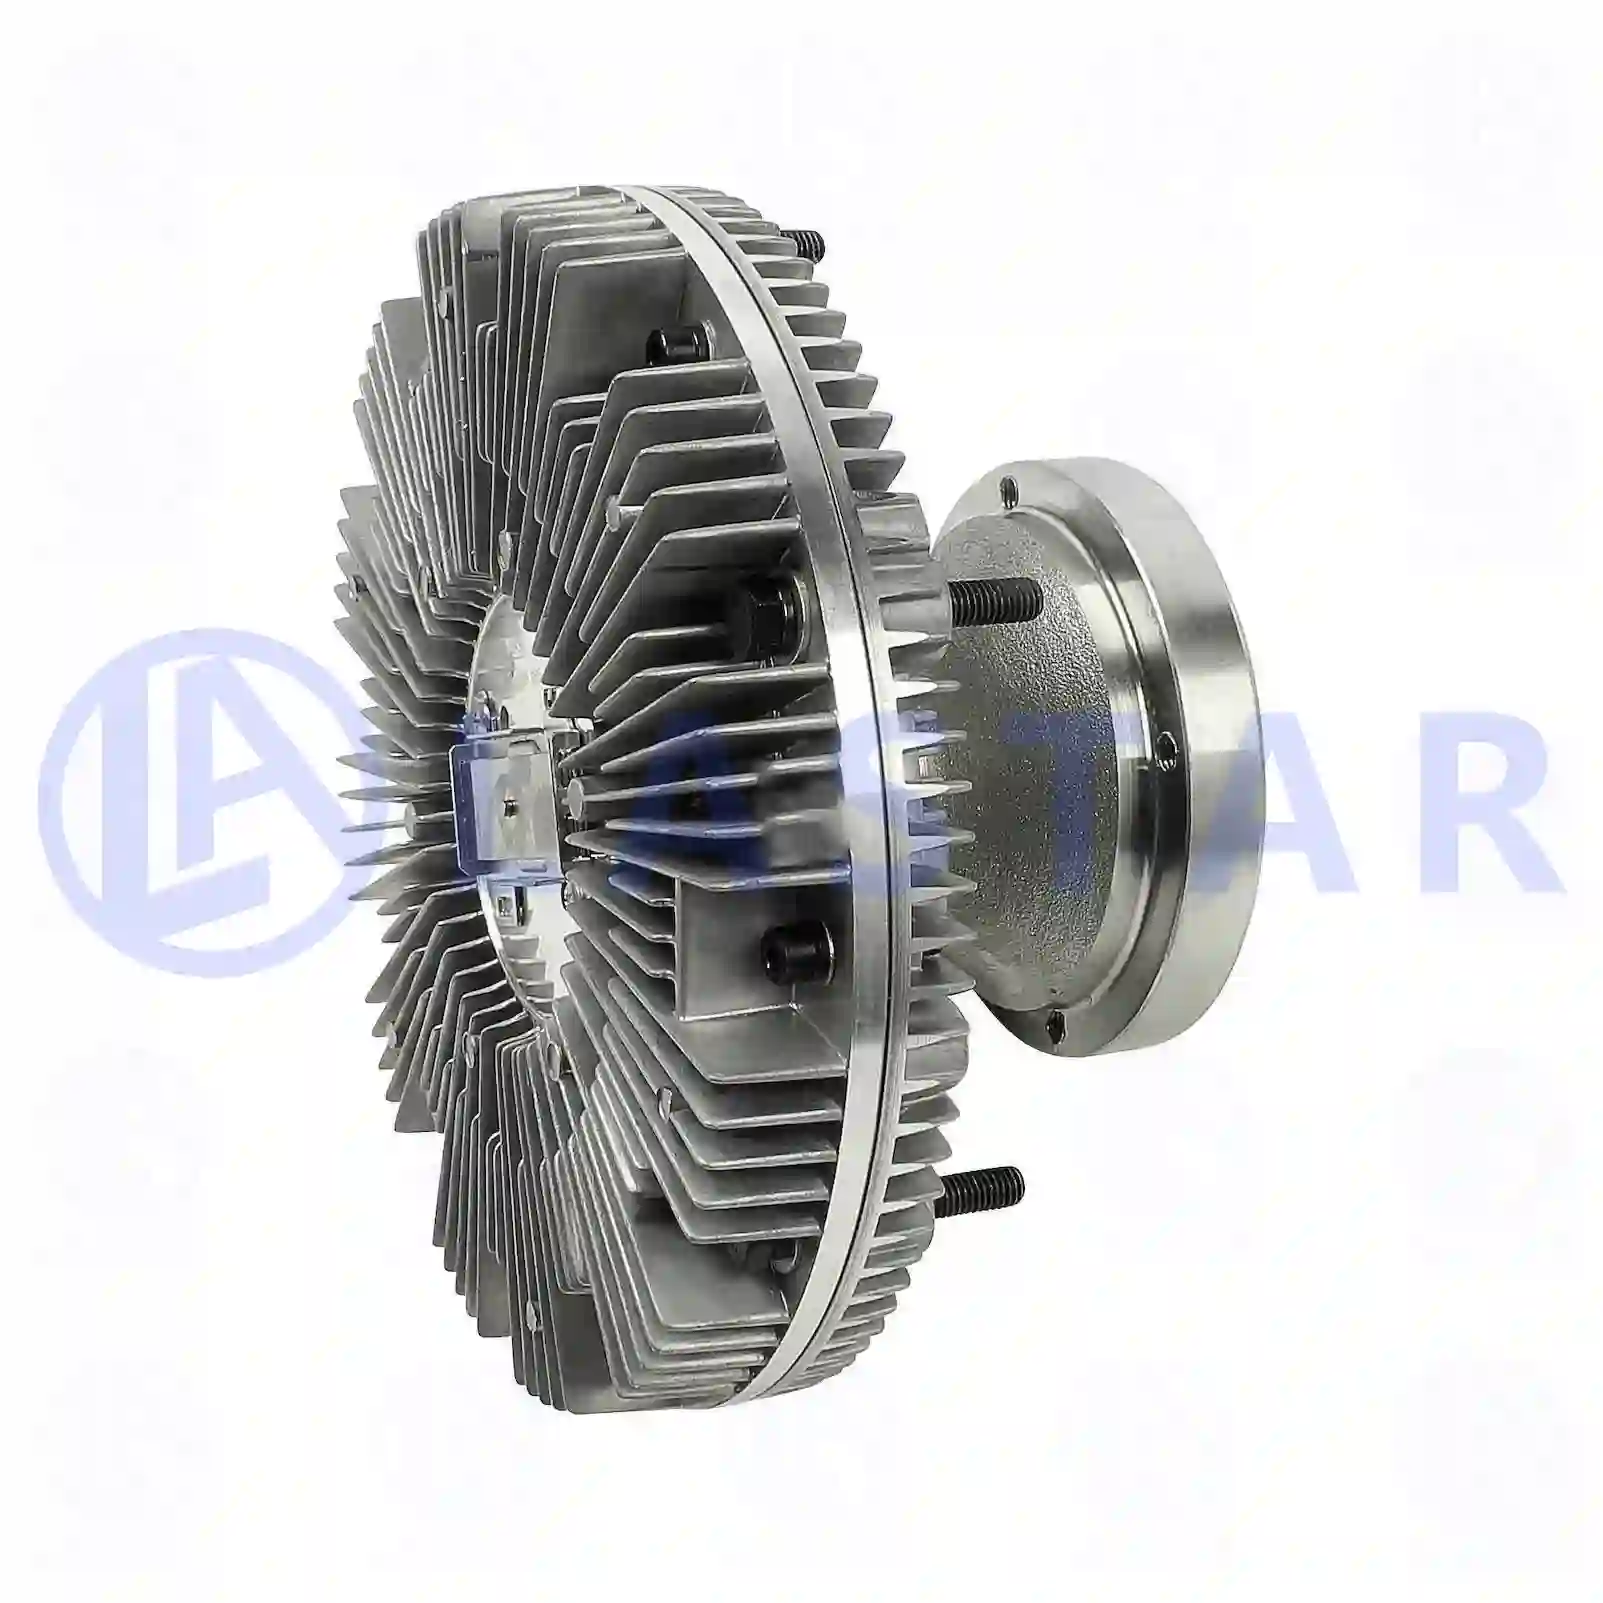 Fan clutch, 77709430, 8149972 ||  77709430 Lastar Spare Part | Truck Spare Parts, Auotomotive Spare Parts Fan clutch, 77709430, 8149972 ||  77709430 Lastar Spare Part | Truck Spare Parts, Auotomotive Spare Parts